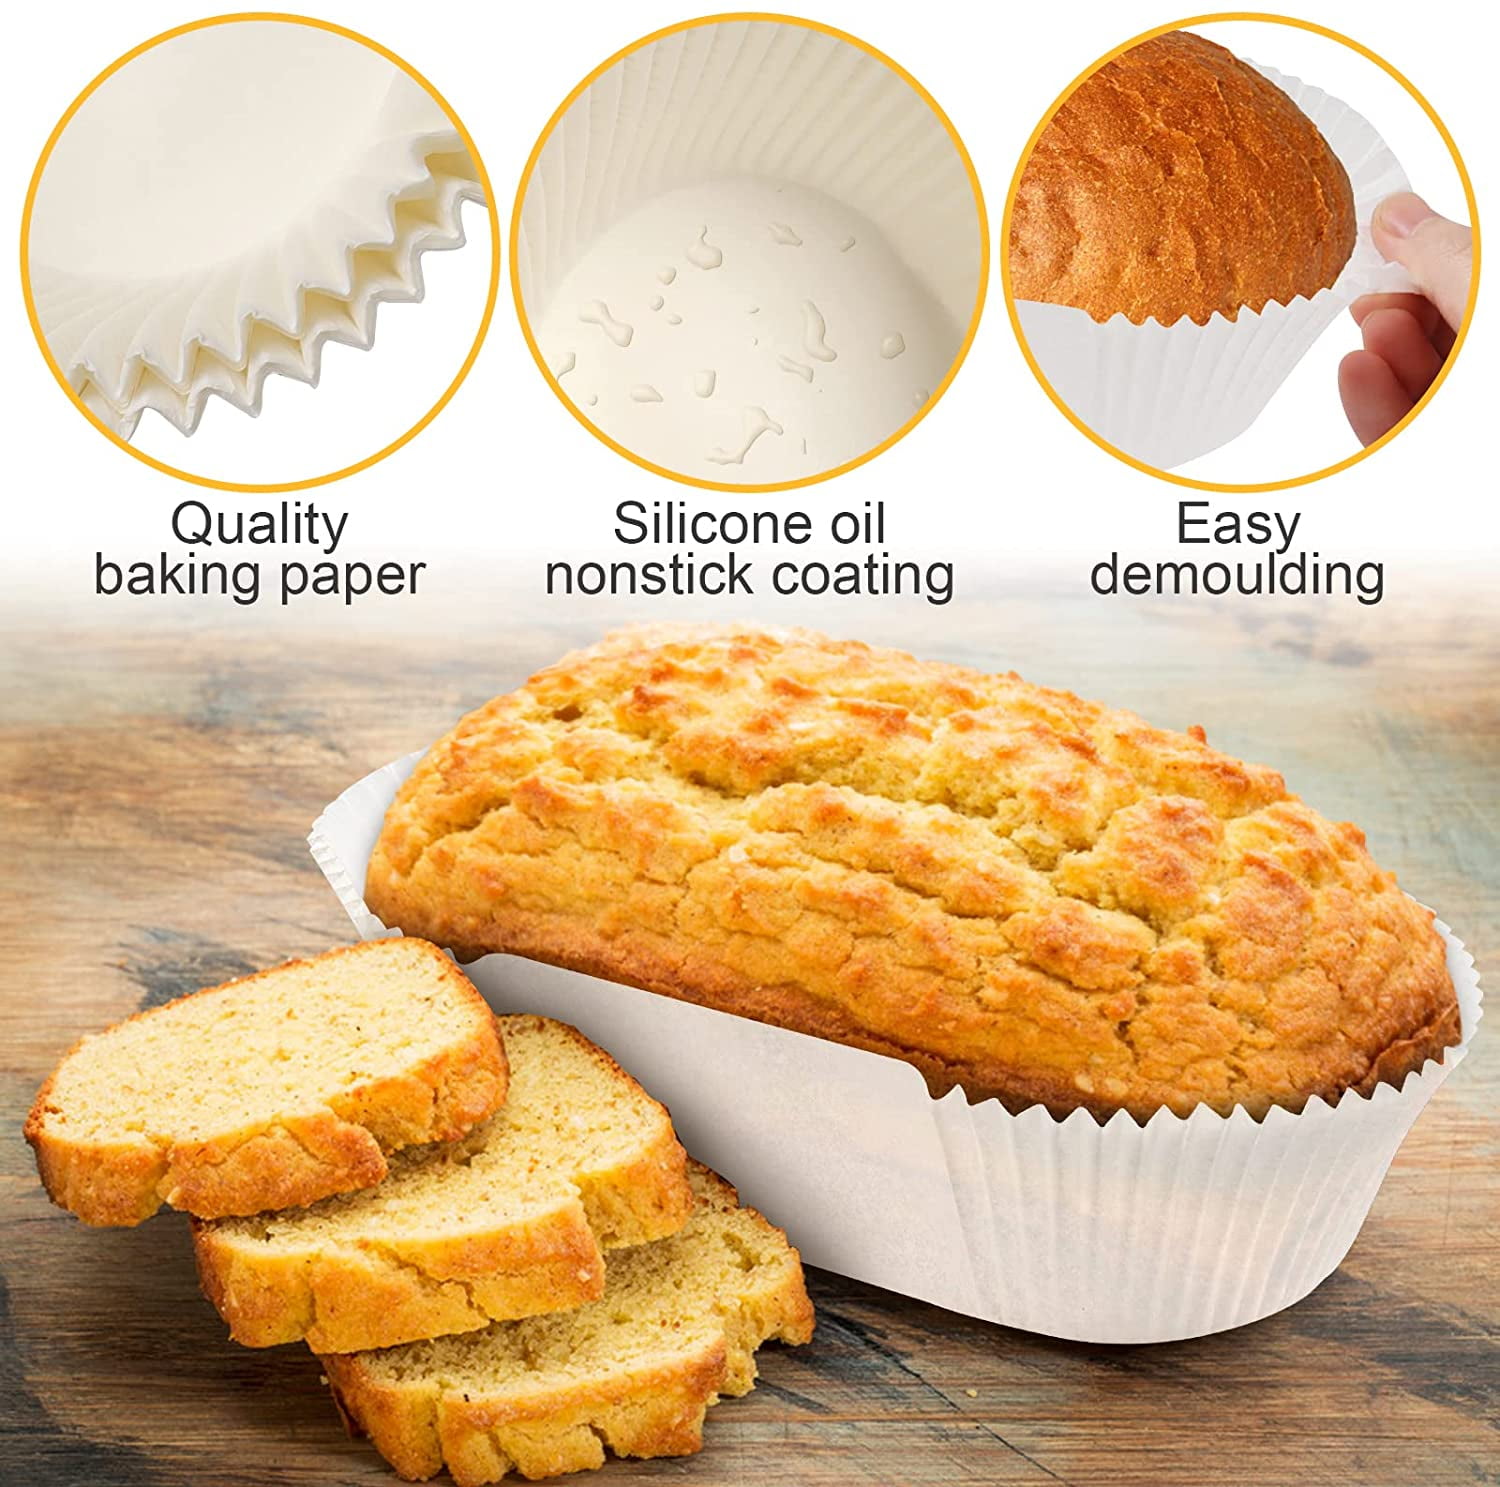 BULK Buys HW834 Non-stick Loaf Bread Baking Liners White for sale online